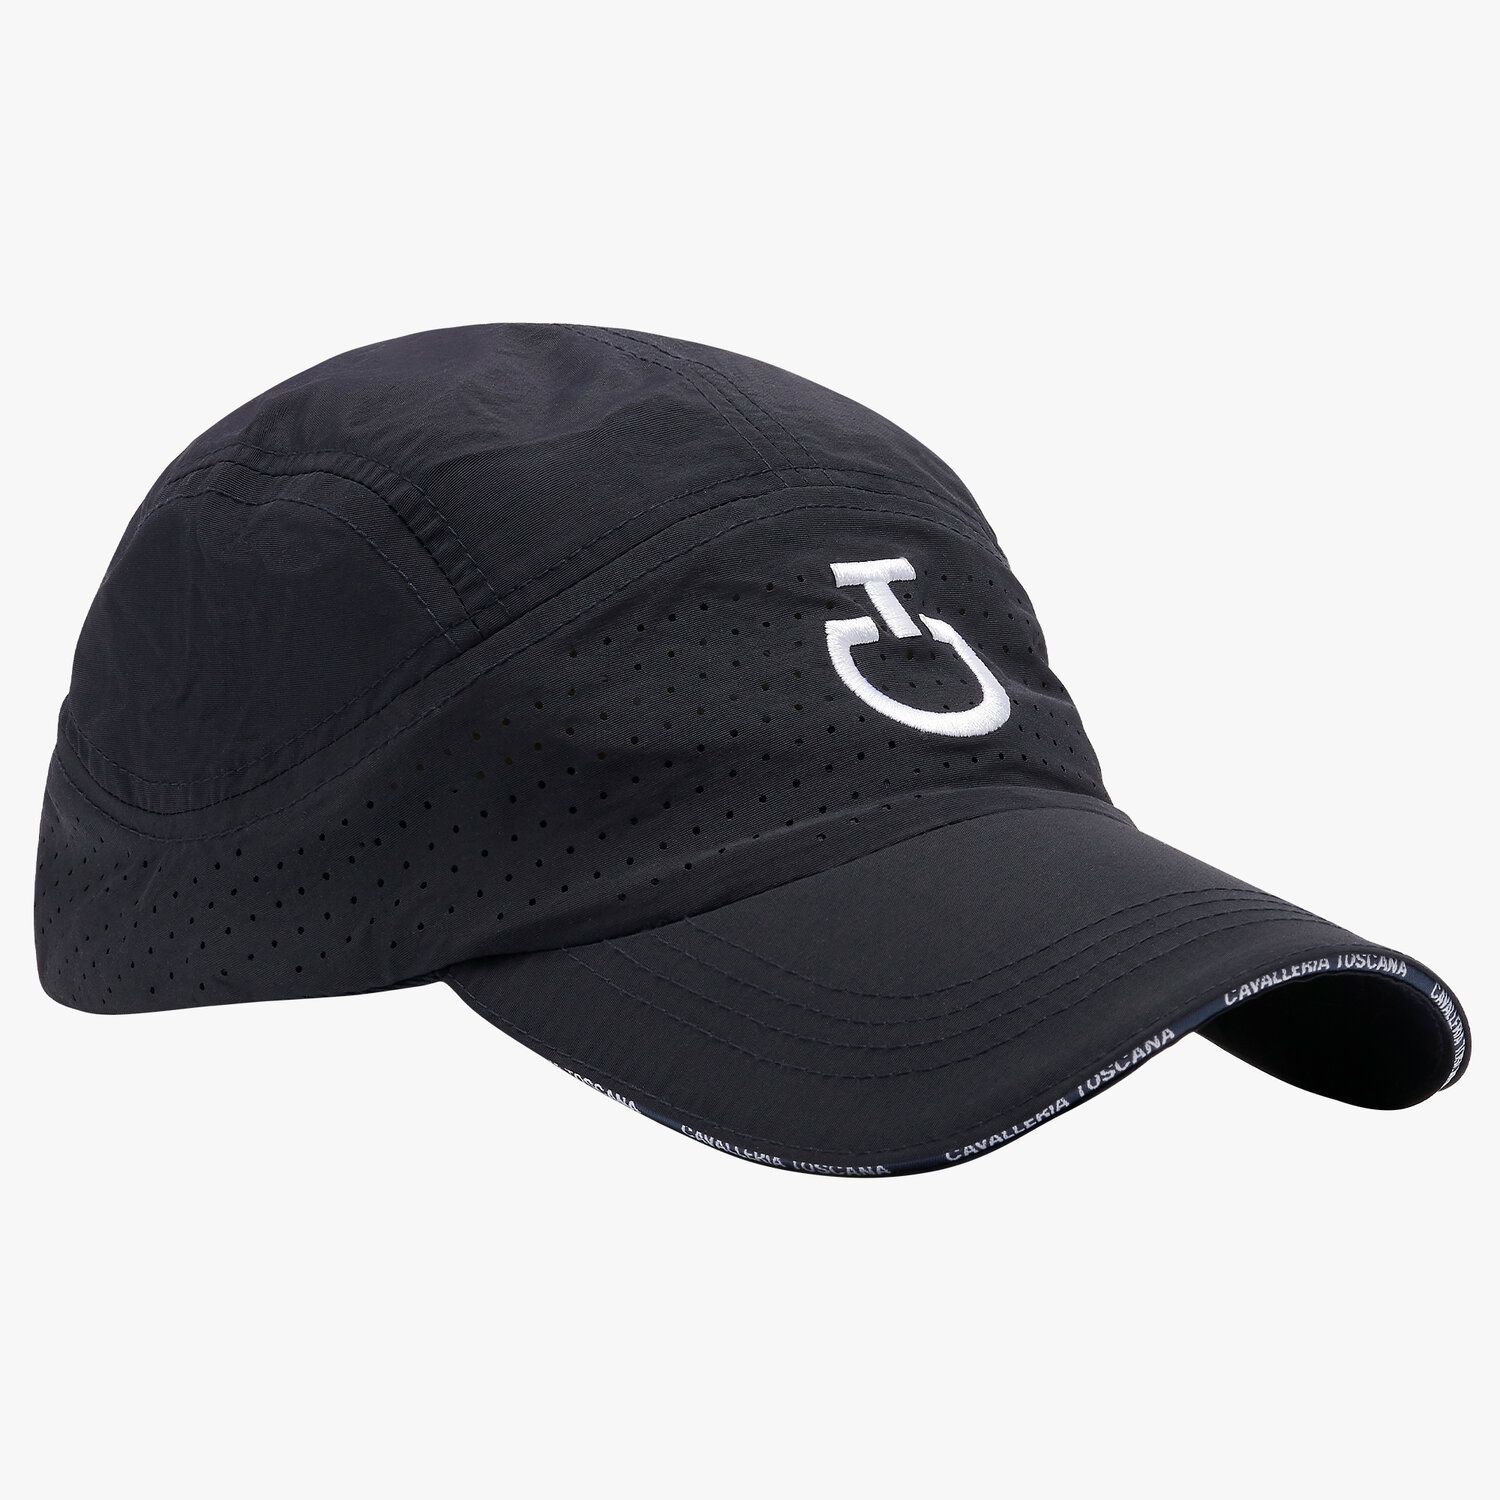 Cavalleria Toscana Nylon cap with a perforated panel and embroidered logo NAVY-2